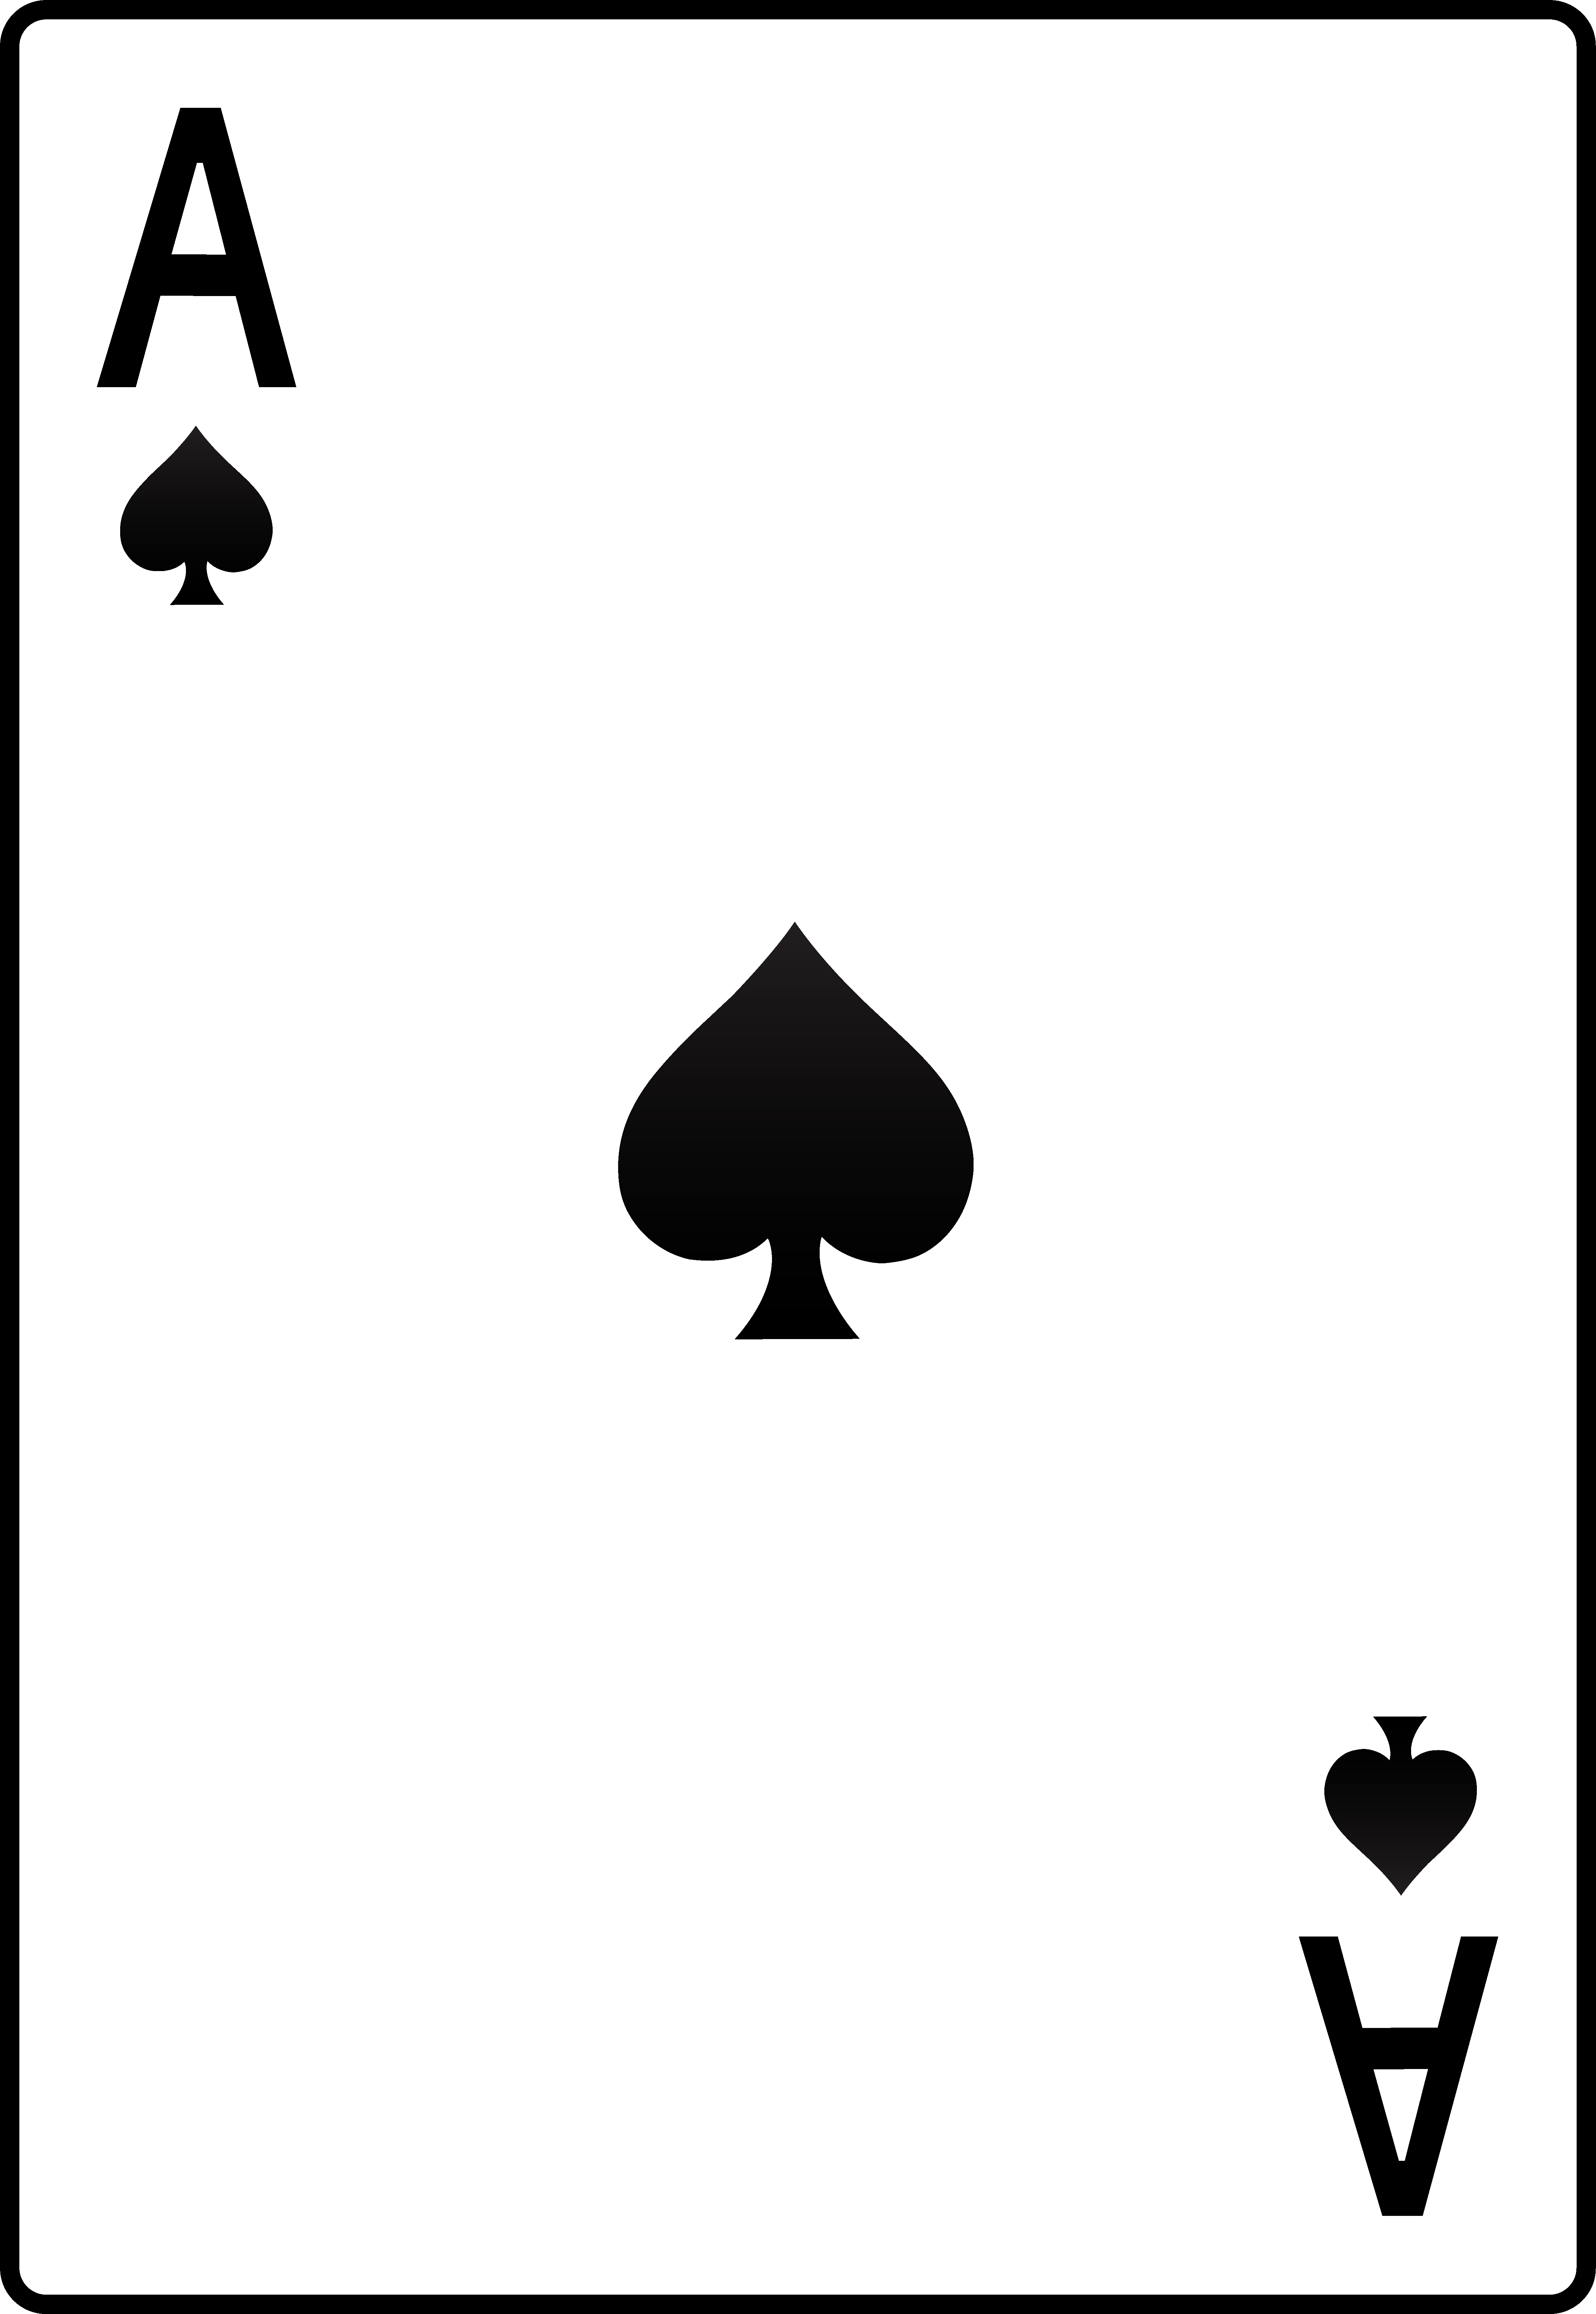 Ace of spades clipart